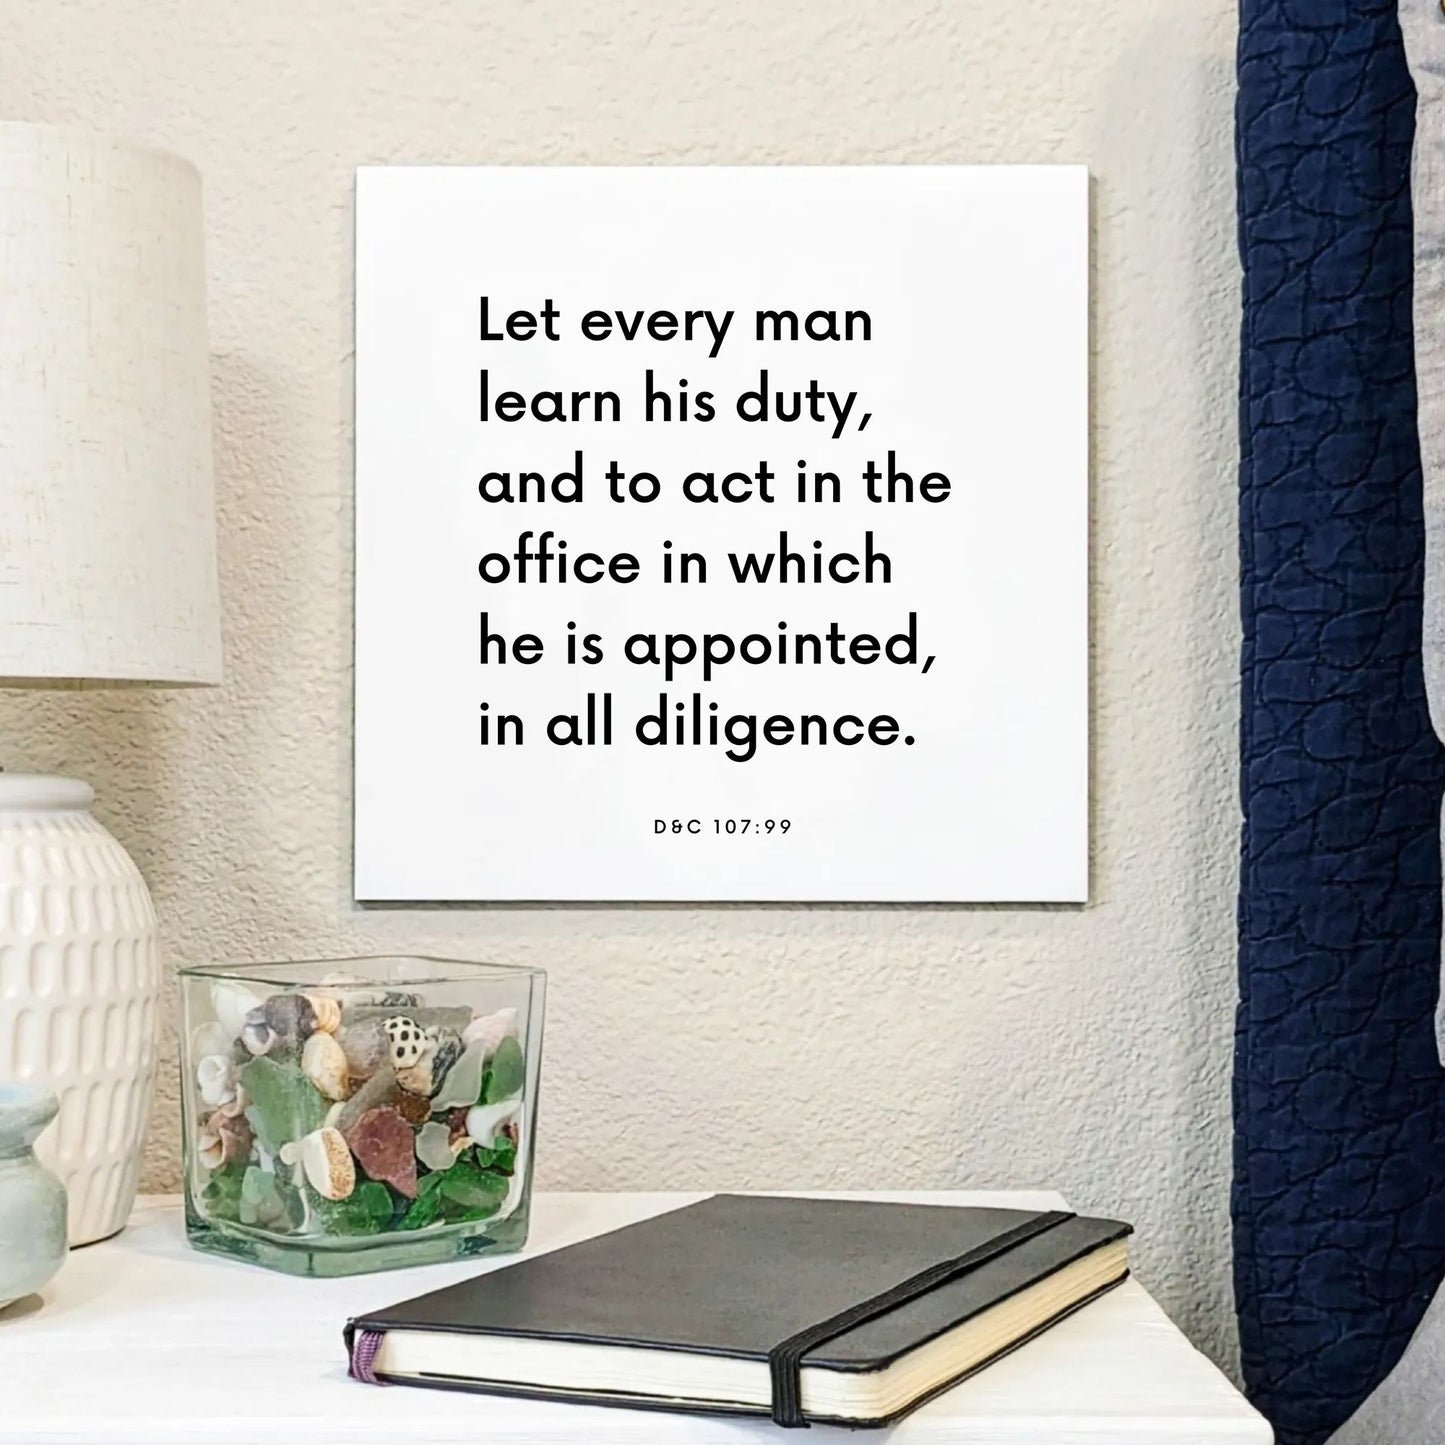 Bedside mouting of the scripture tile for D&C 107:99 - "Let every man learn his duty"